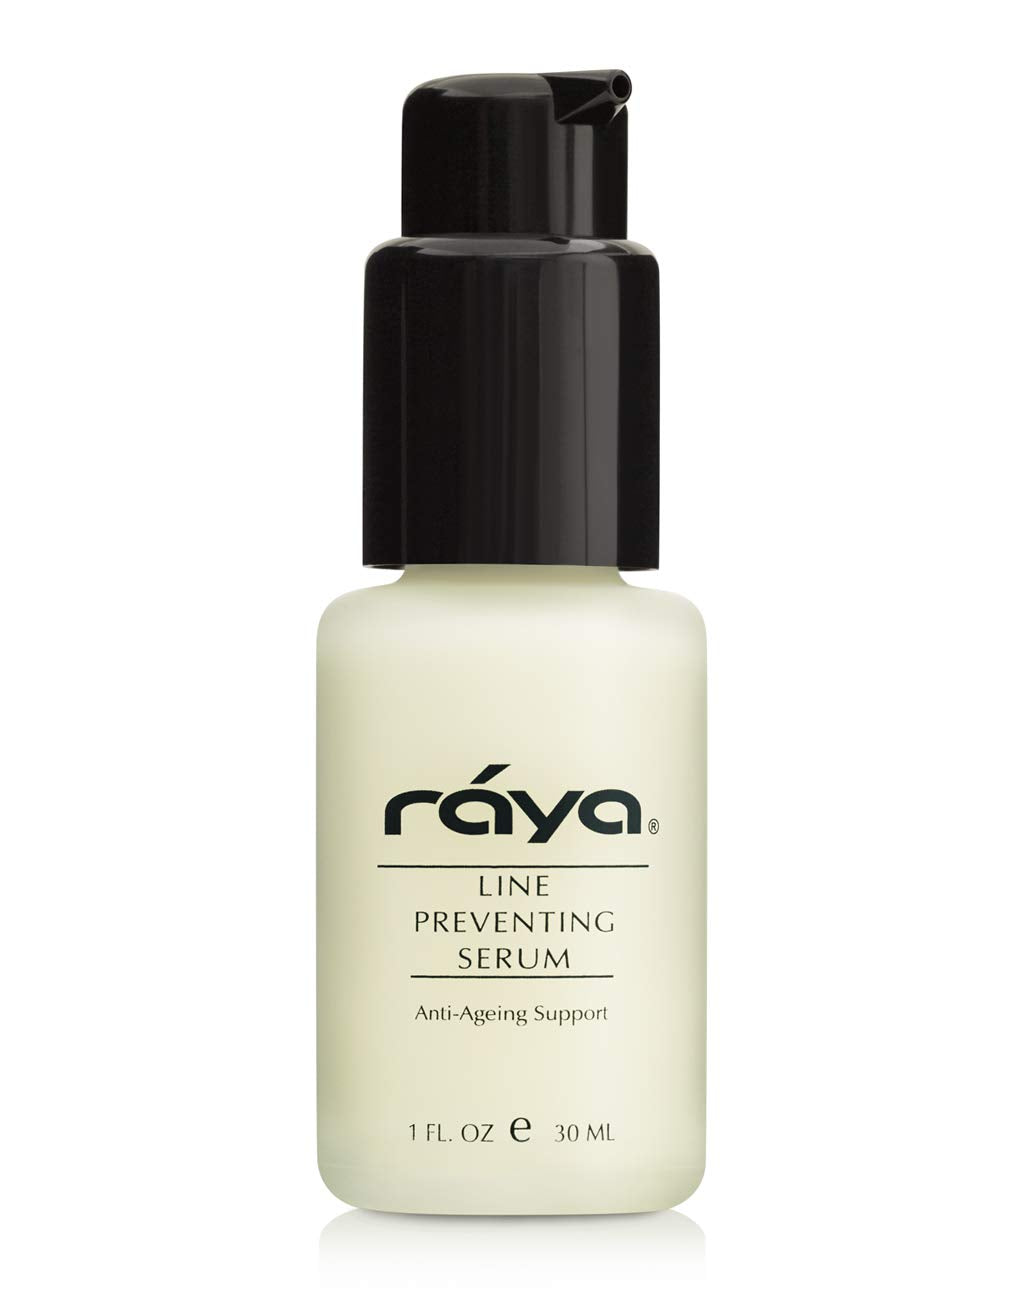 RAYA Line Preventing Serum (507) | Active, Anti-Aging Facial Treatment for All Skin | Helps Reduce Fine Lines and Wrinkles